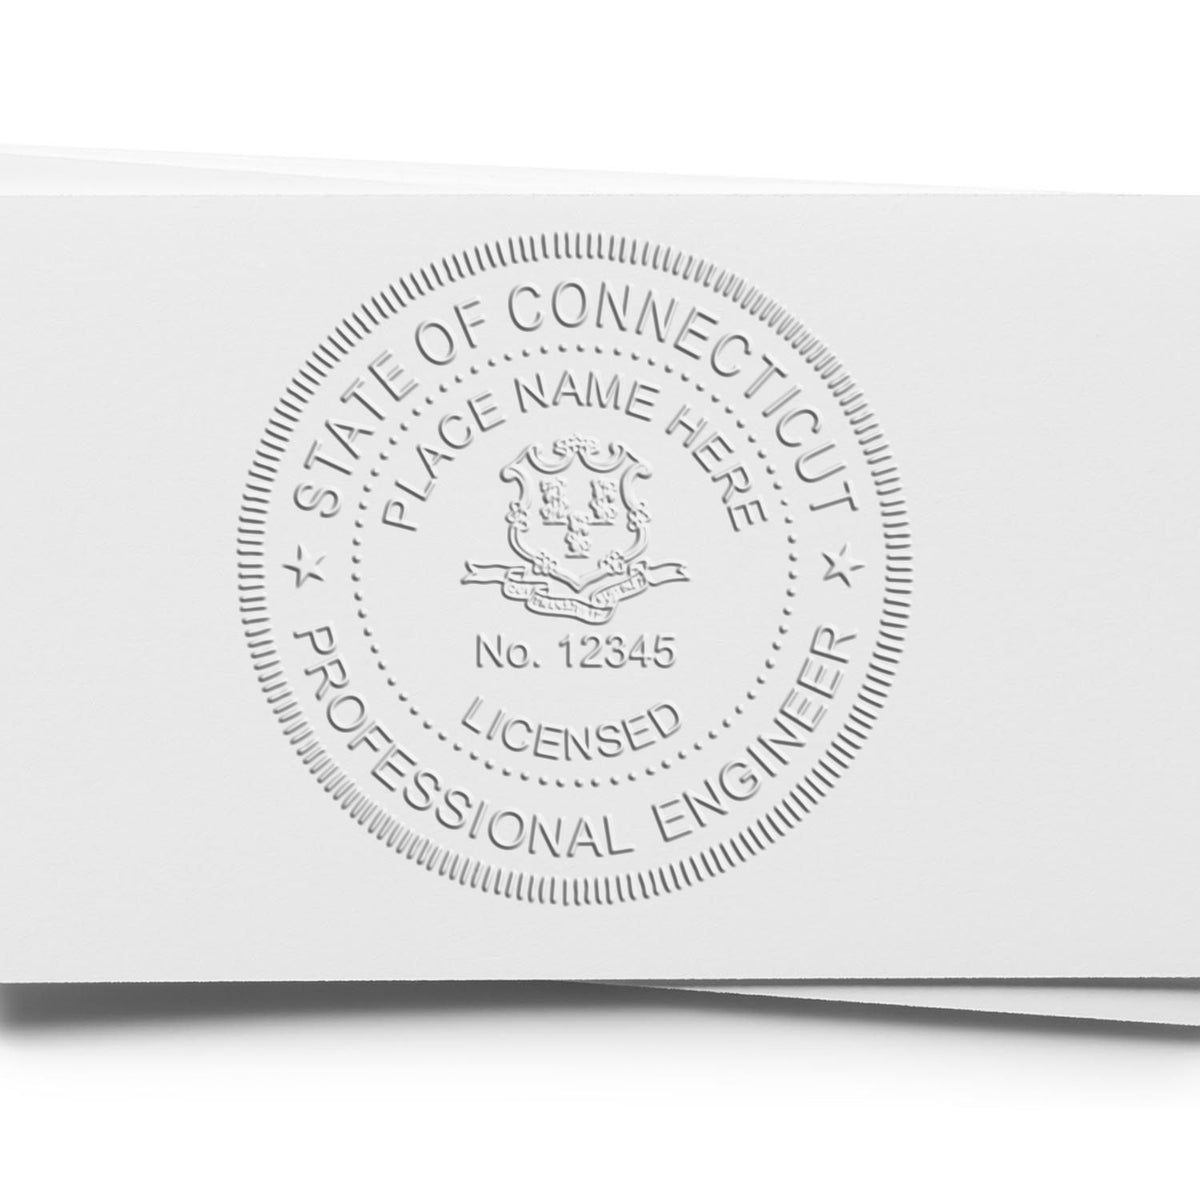 The Heavy Duty Cast Iron Connecticut Engineer Seal Embosser stamp impression comes to life with a crisp, detailed photo on paper - showcasing true professional quality.